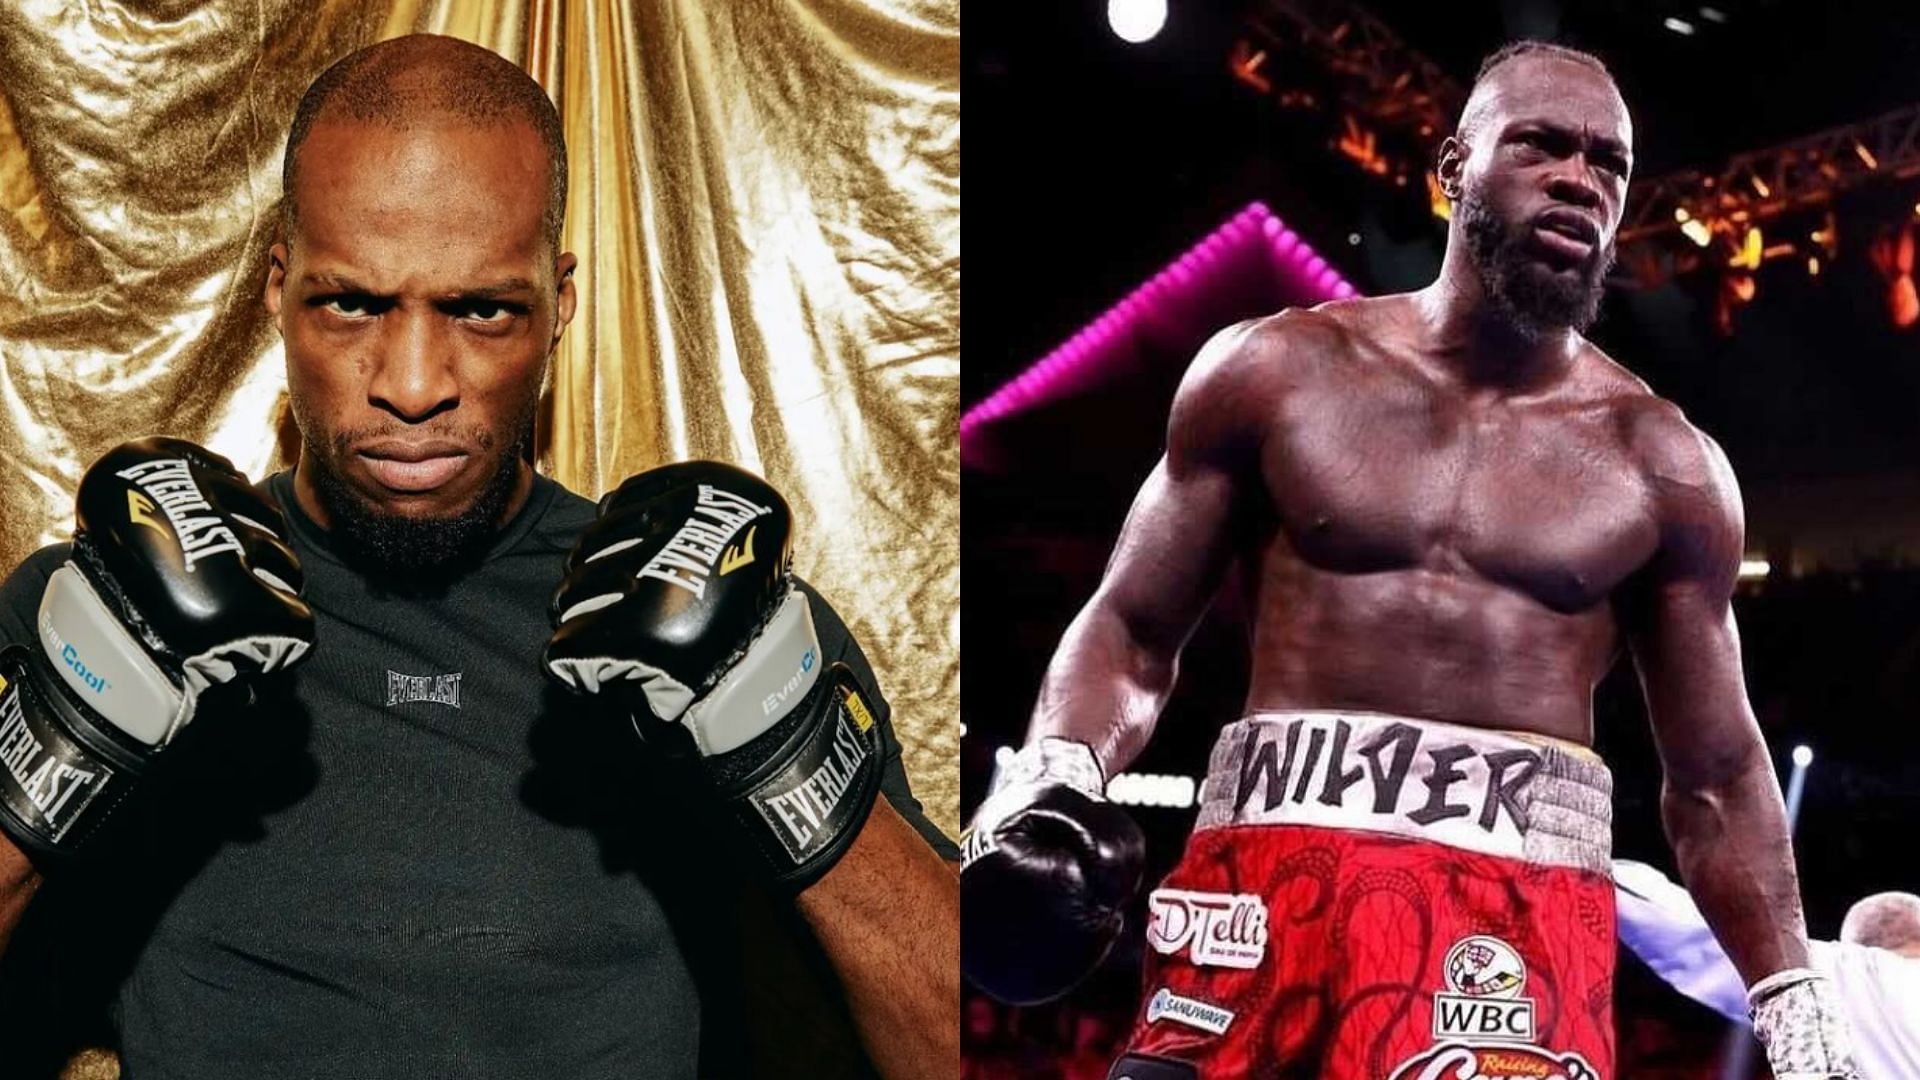 Michael Page (left, @michaelvenompage) and Deontay Wilder (right, @bronzebomber) Images via Instagram